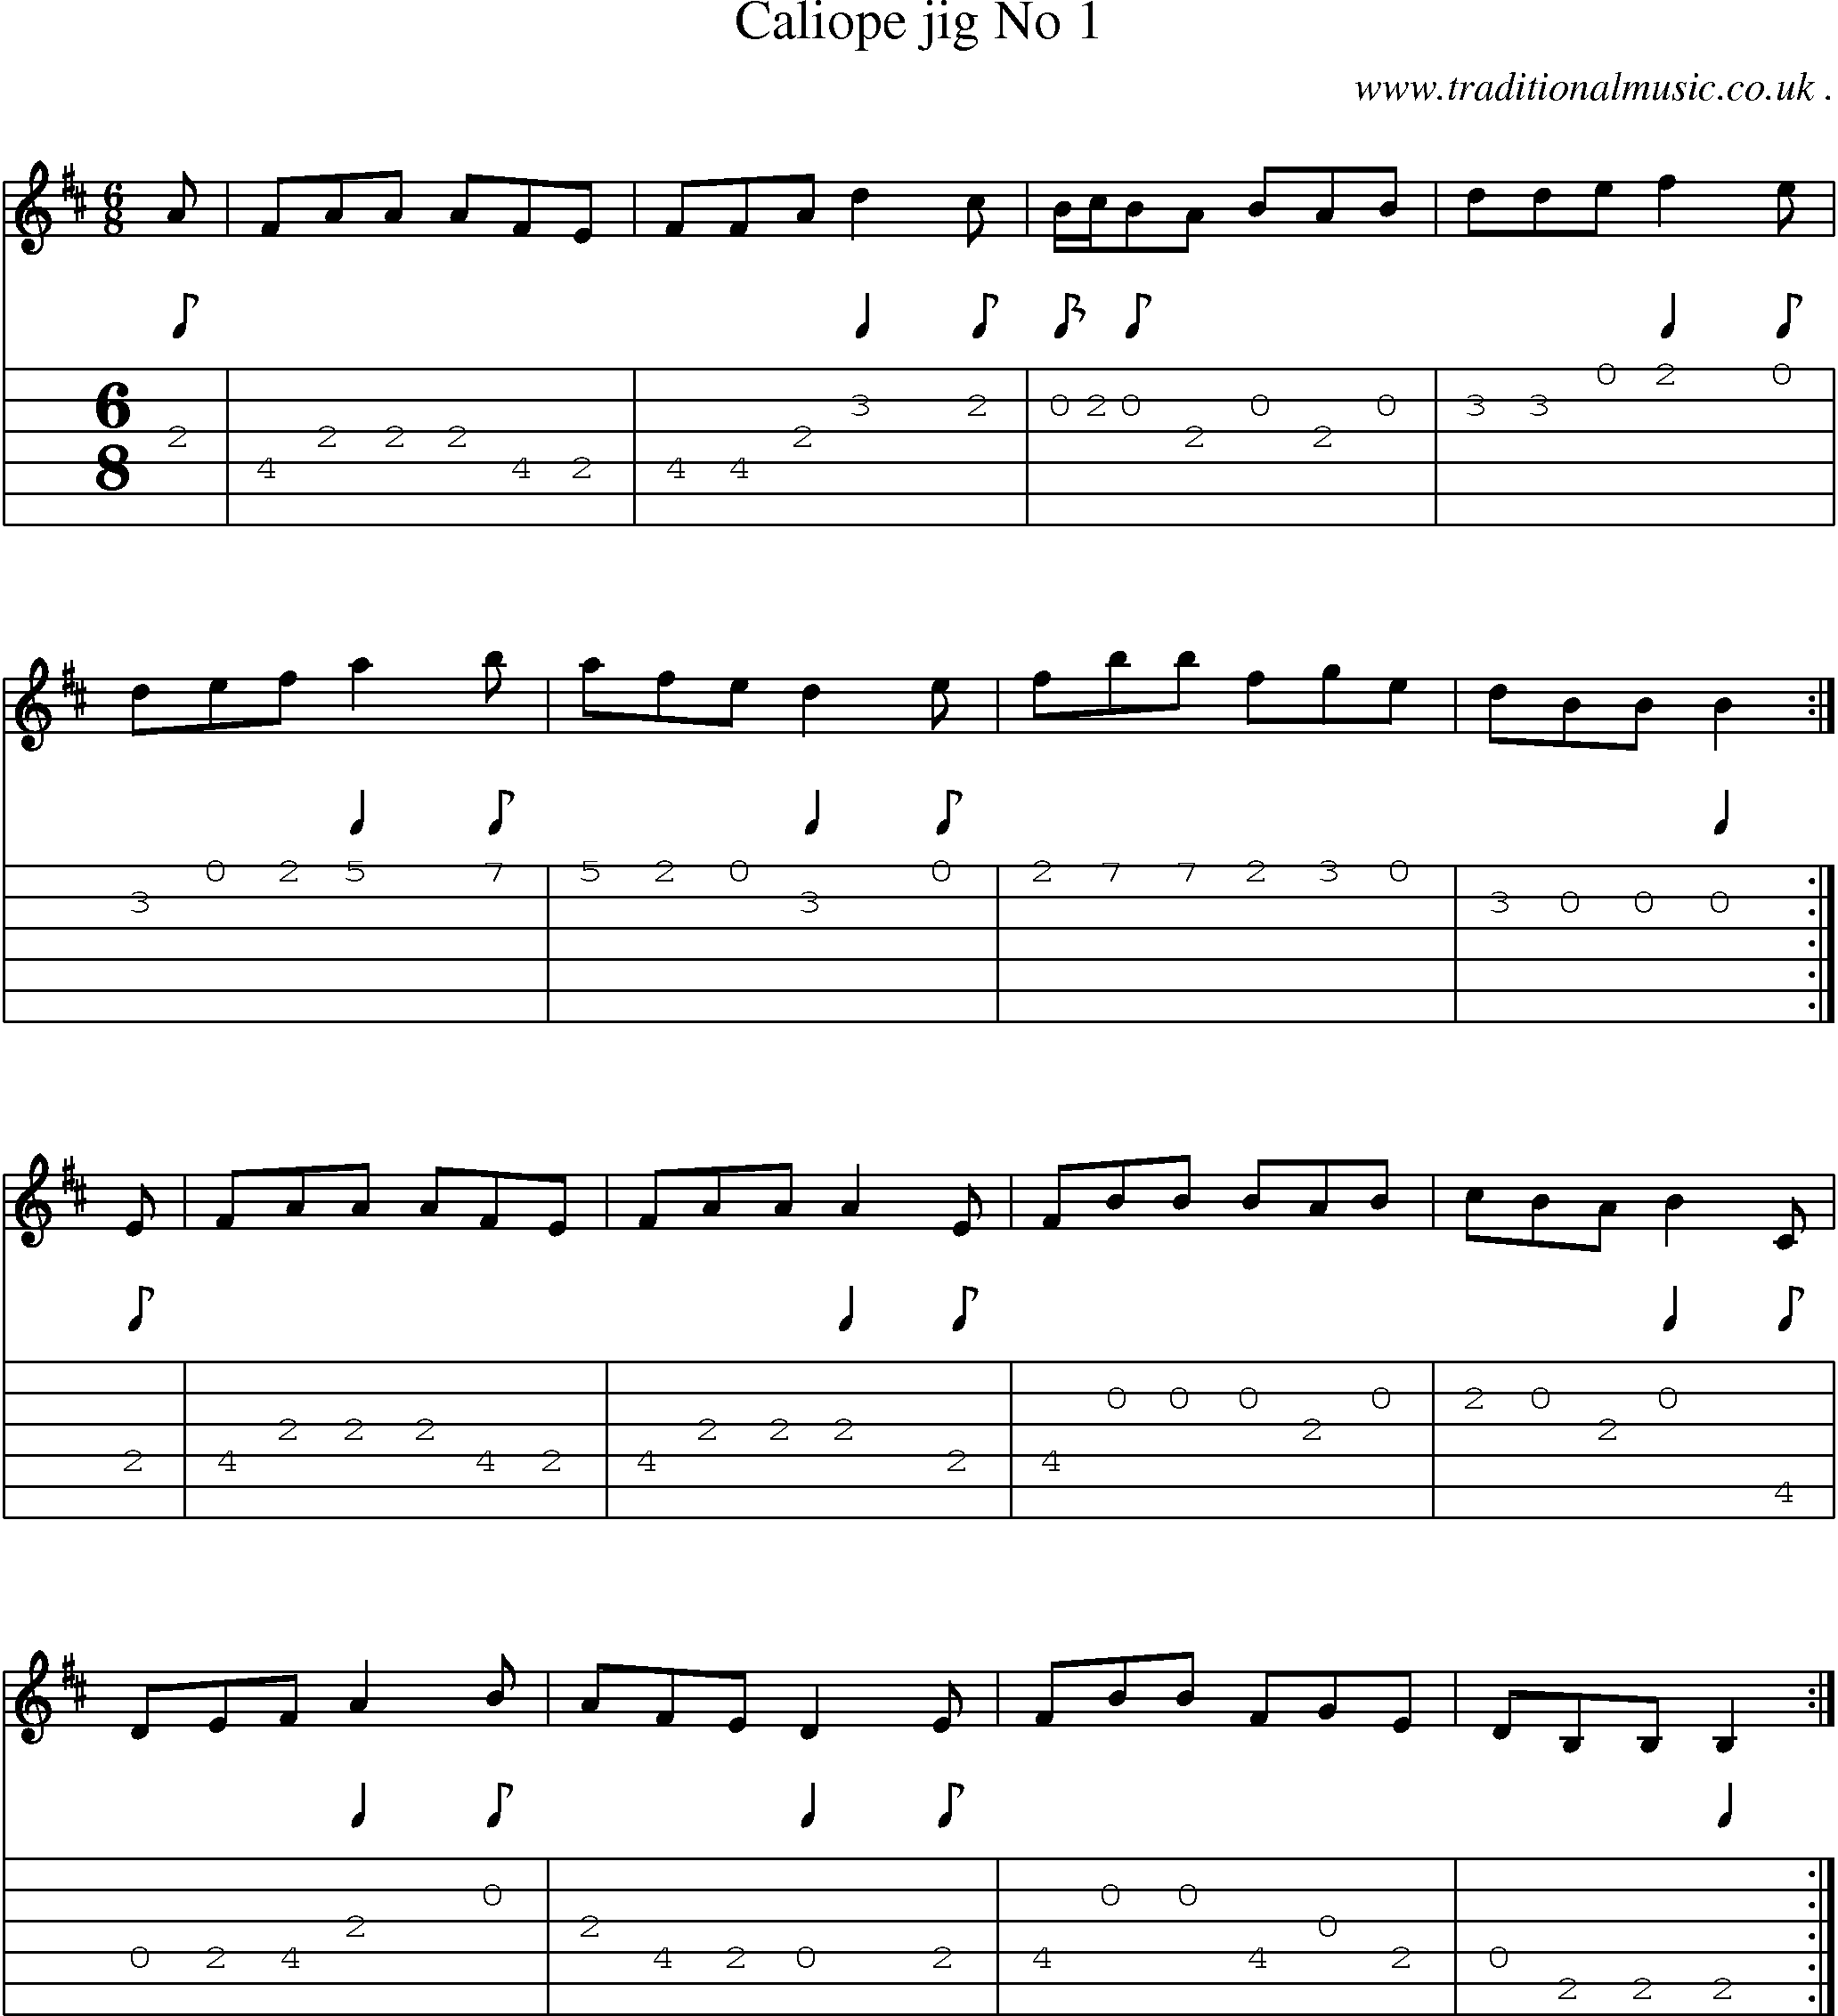 Sheet-Music and Guitar Tabs for Caliope Jig No 1